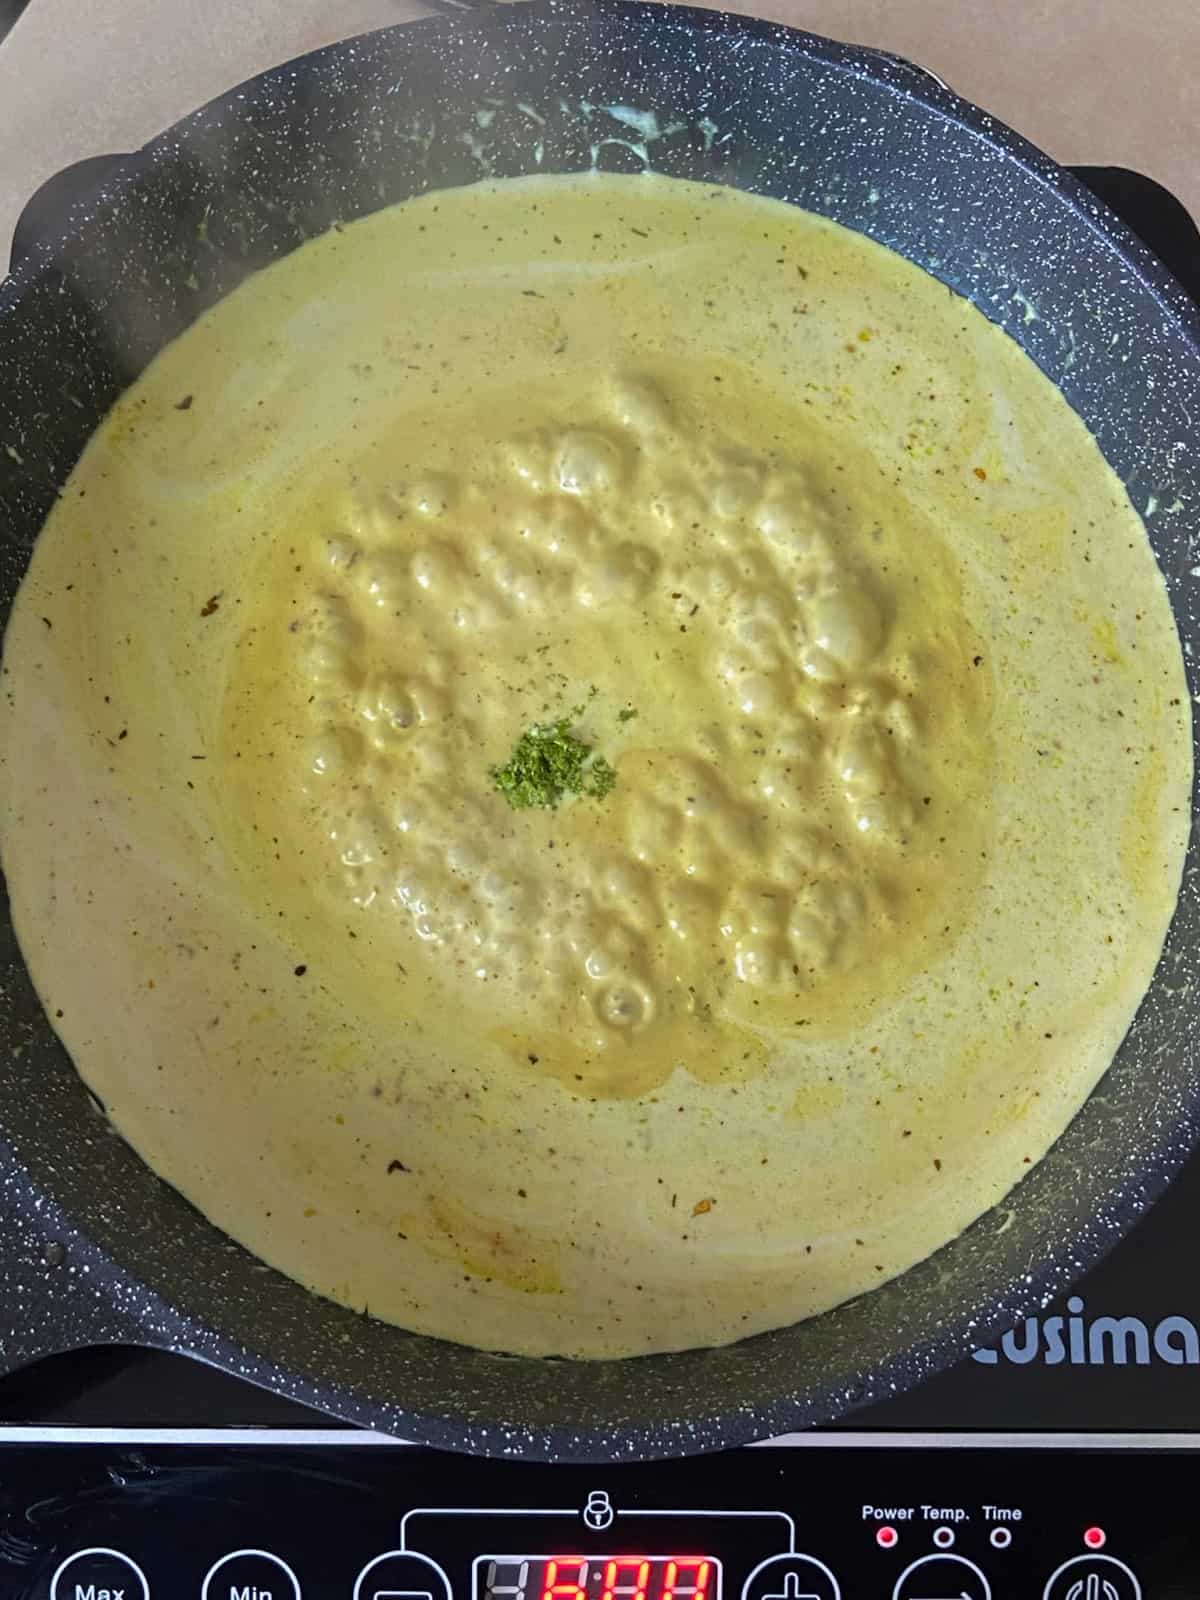 yellow sauce simmering in a pan